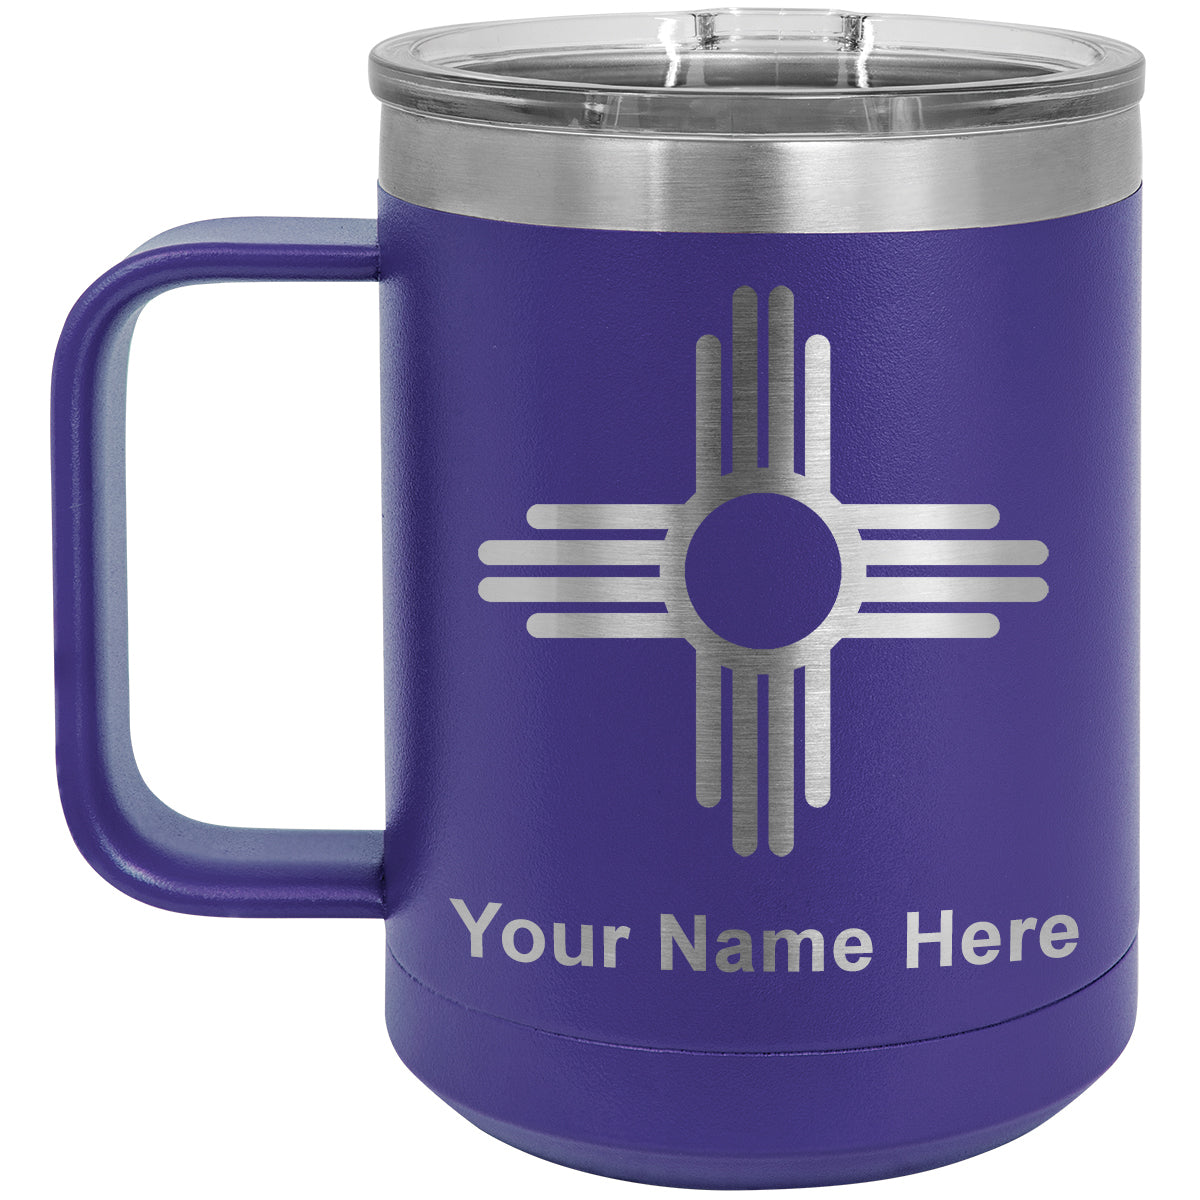 15oz Vacuum Insulated Coffee Mug, Flag of New Mexico, Personalized Engraving Included